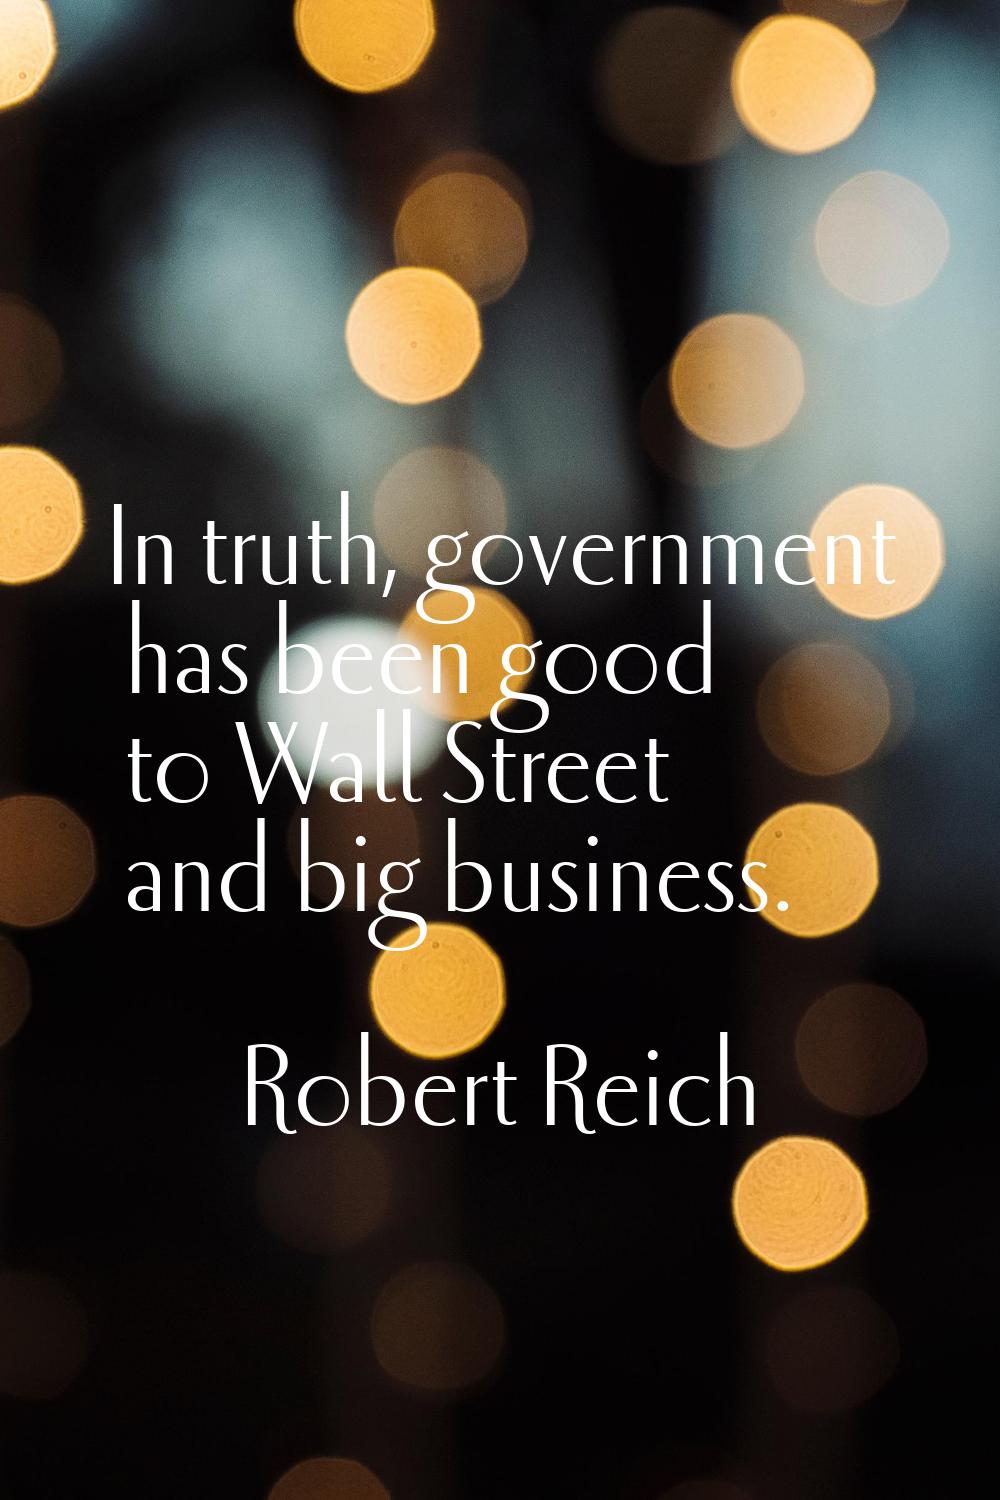 In truth, government has been good to Wall Street and big business.